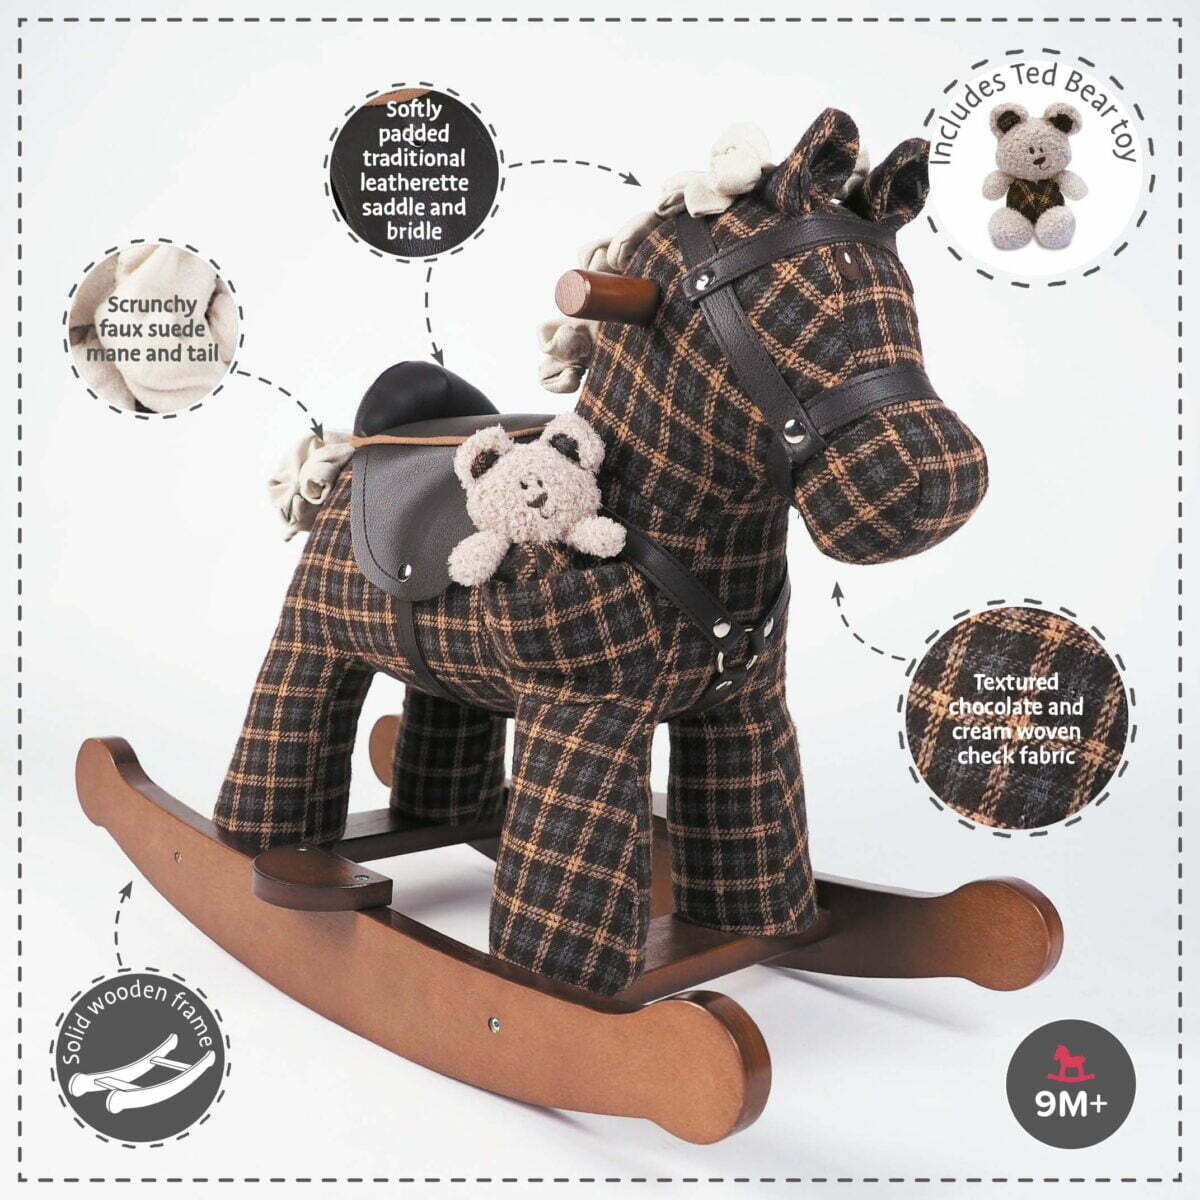 Features and benefits displayed for Rufus & Ted Rocking Horse